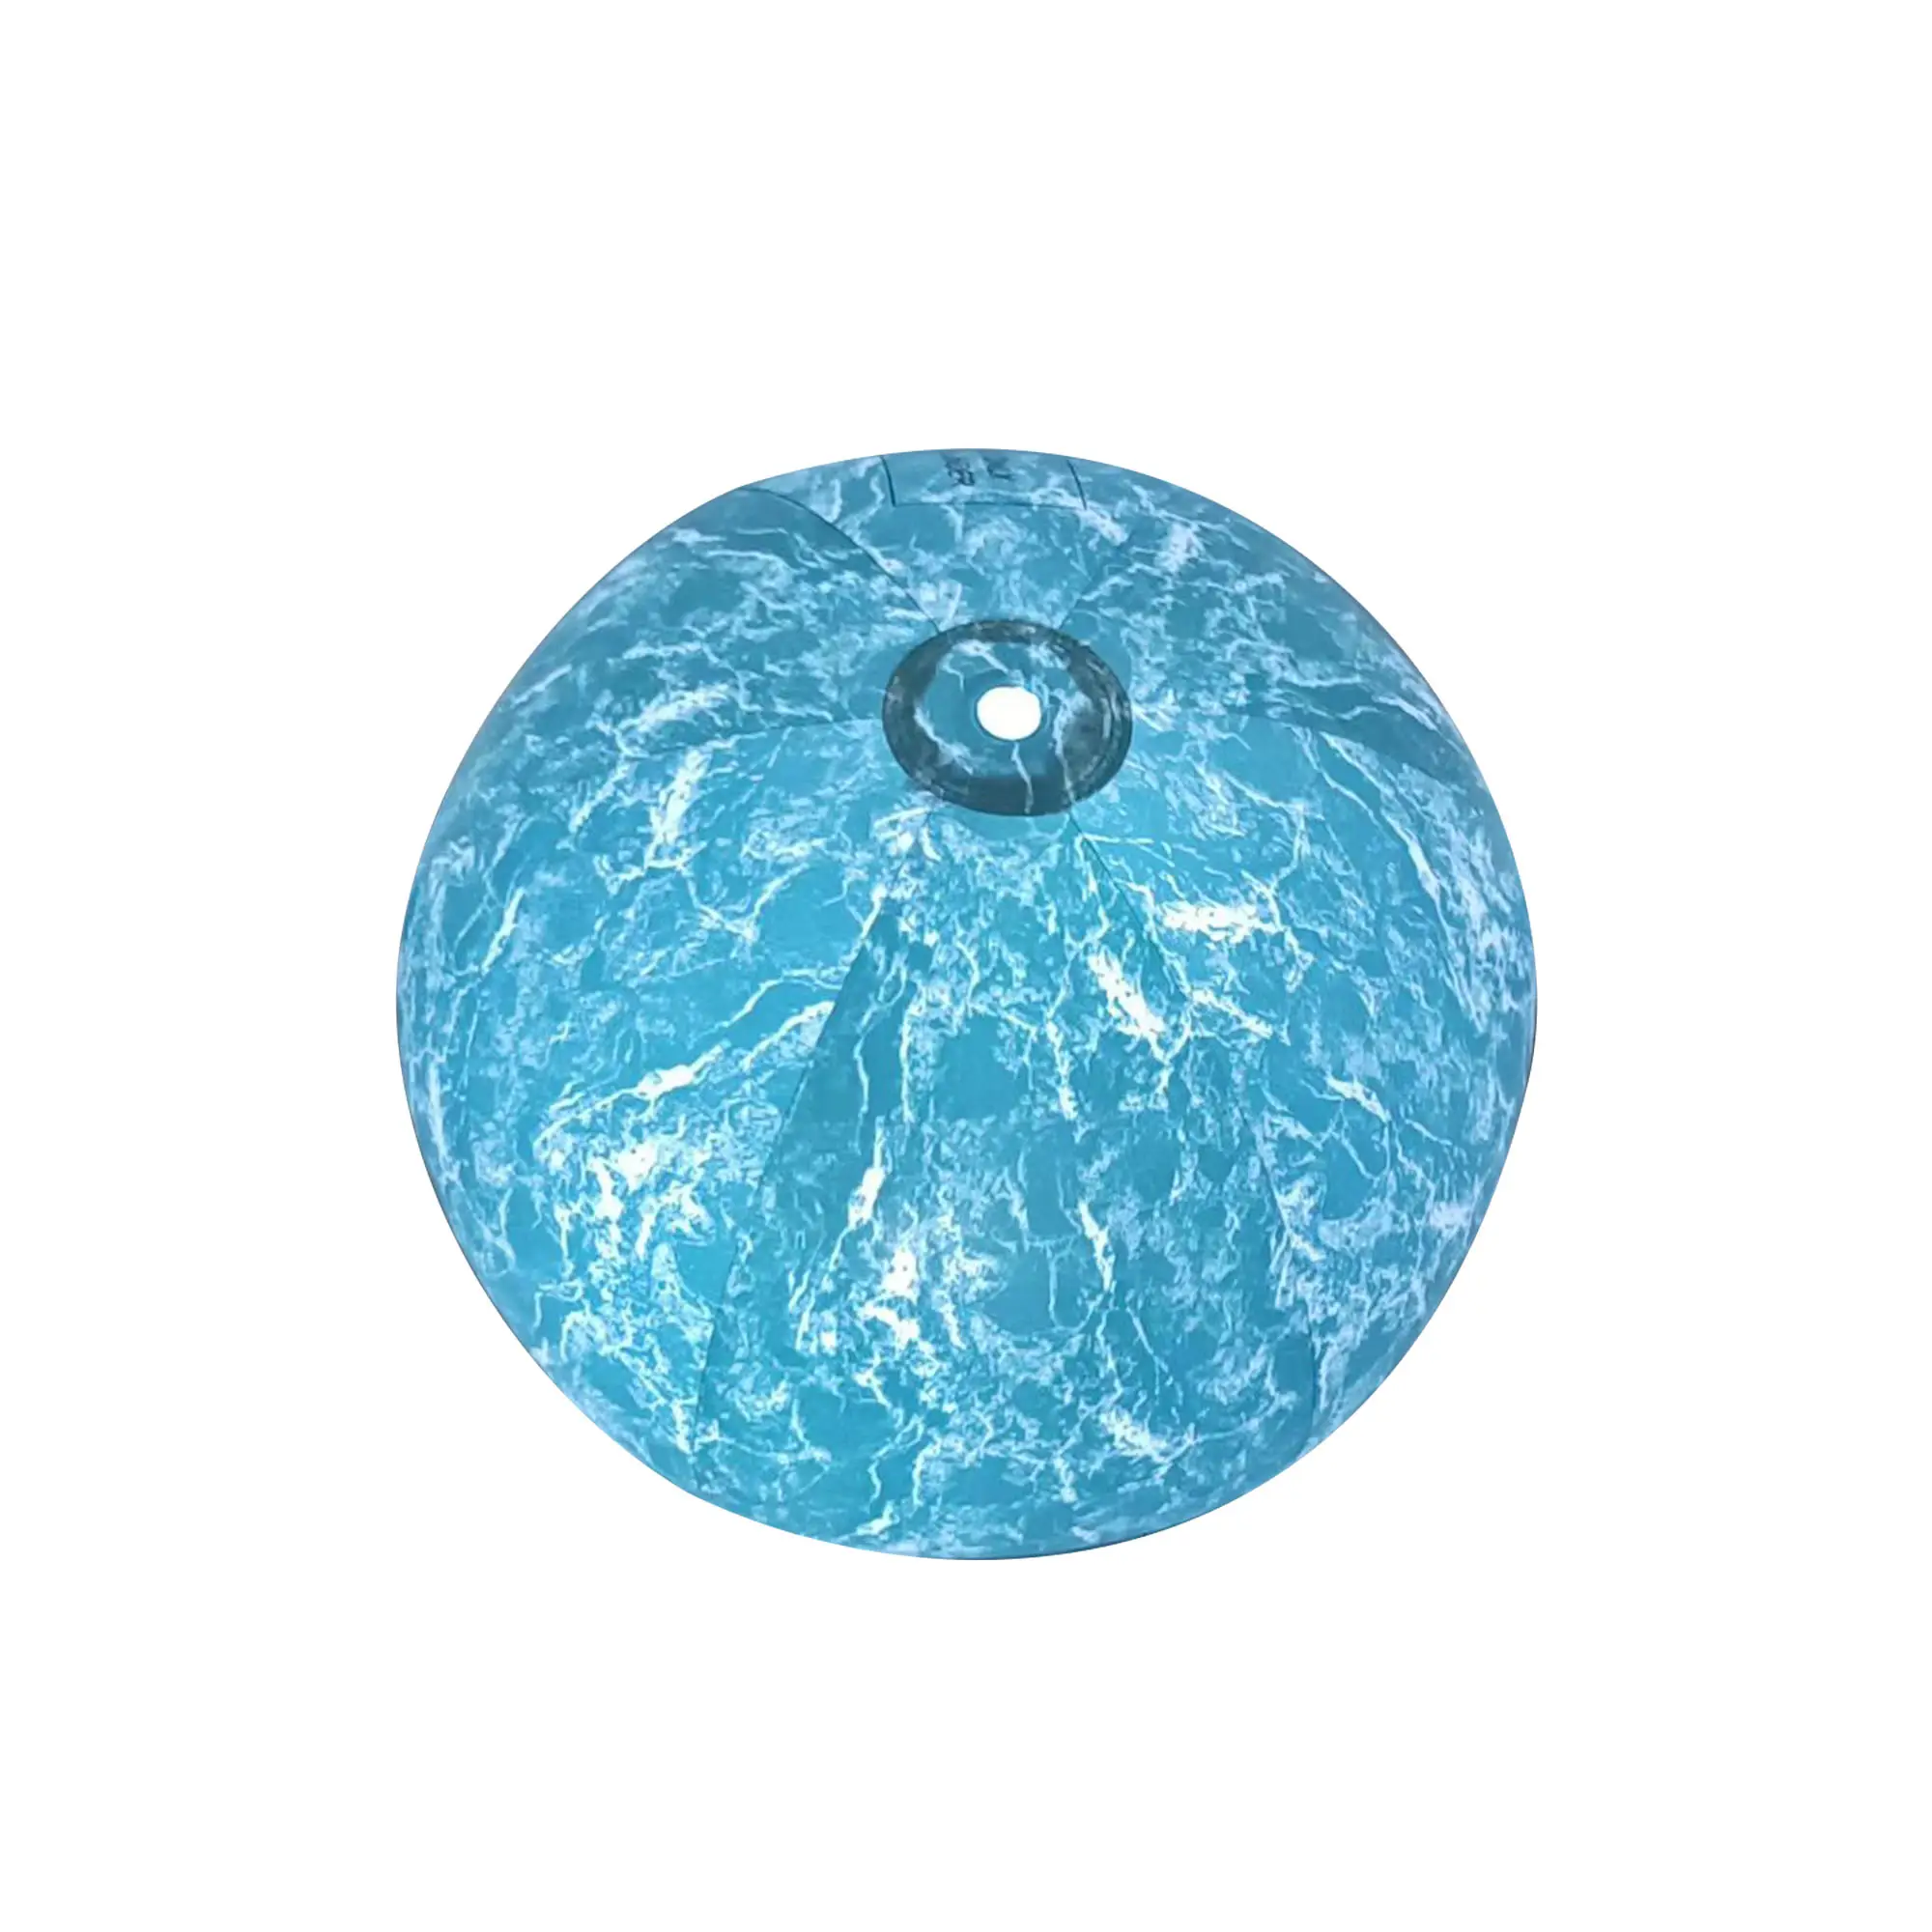 Light Up Beach Ball Inflatable Led Beach Ball with 4 Colors 3 Light Modes, Glow Pool Ball for Pool Party Decorations